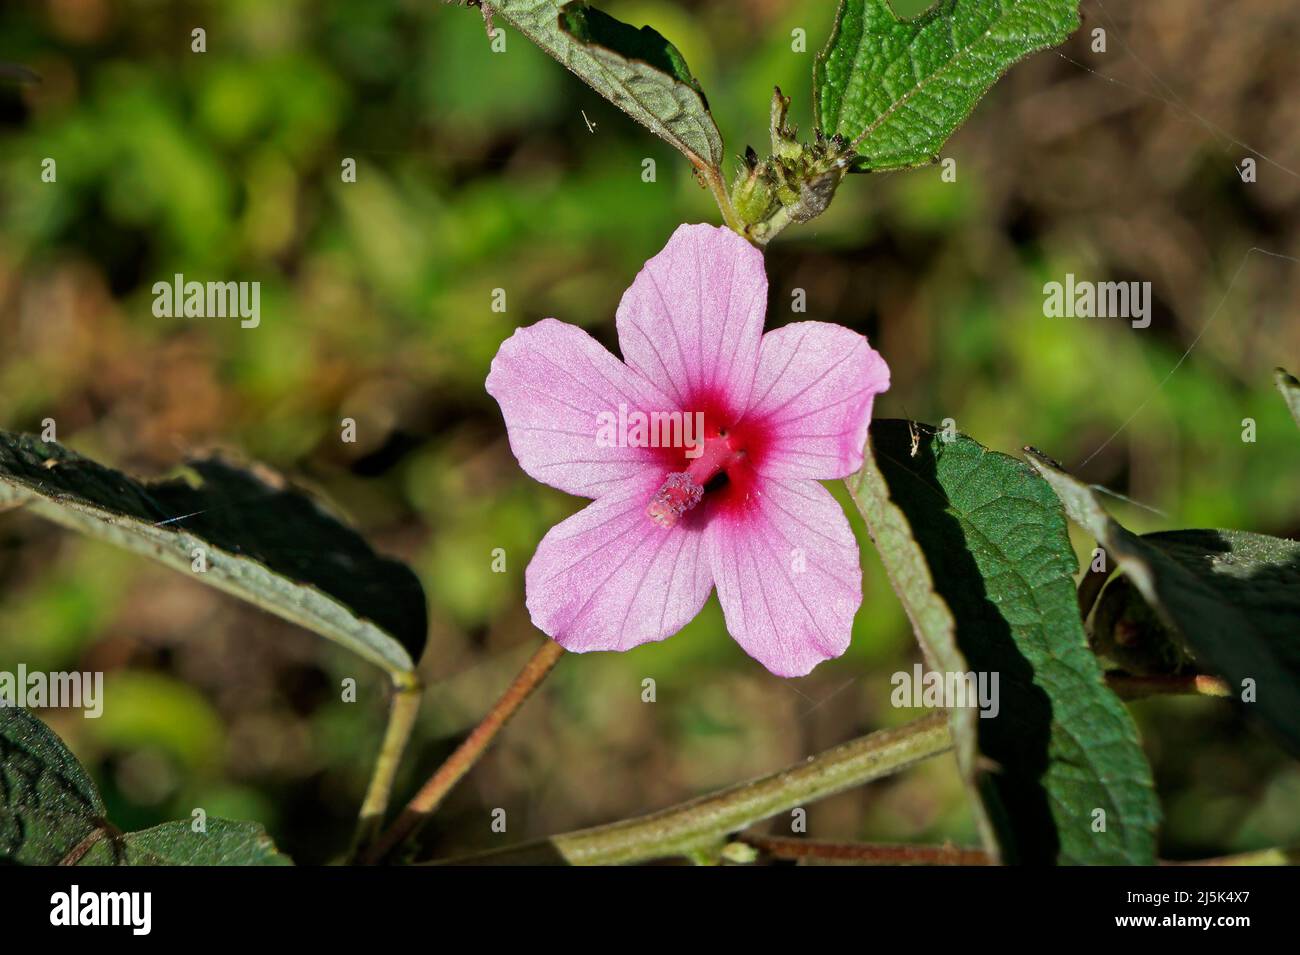 Caesarweed or Congo jute flower (Urena lobata) on tropical forest Stock Photo